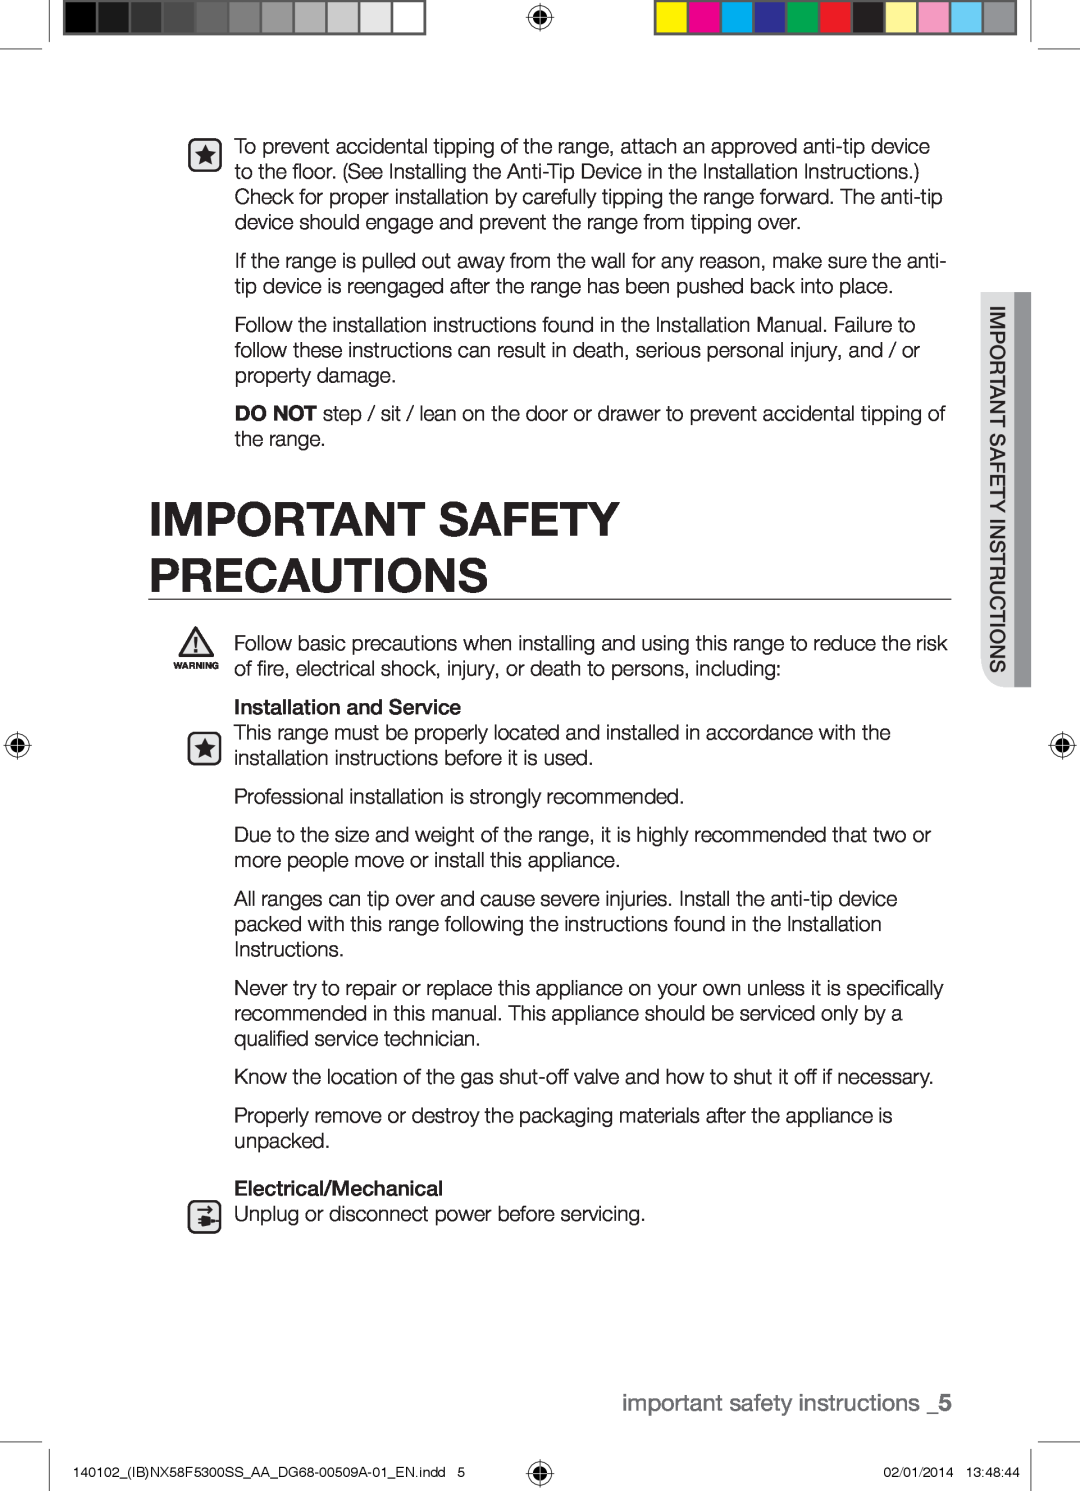 Samsung NX58F5500SW user manual Important Safety Precautions, important safety instructions 